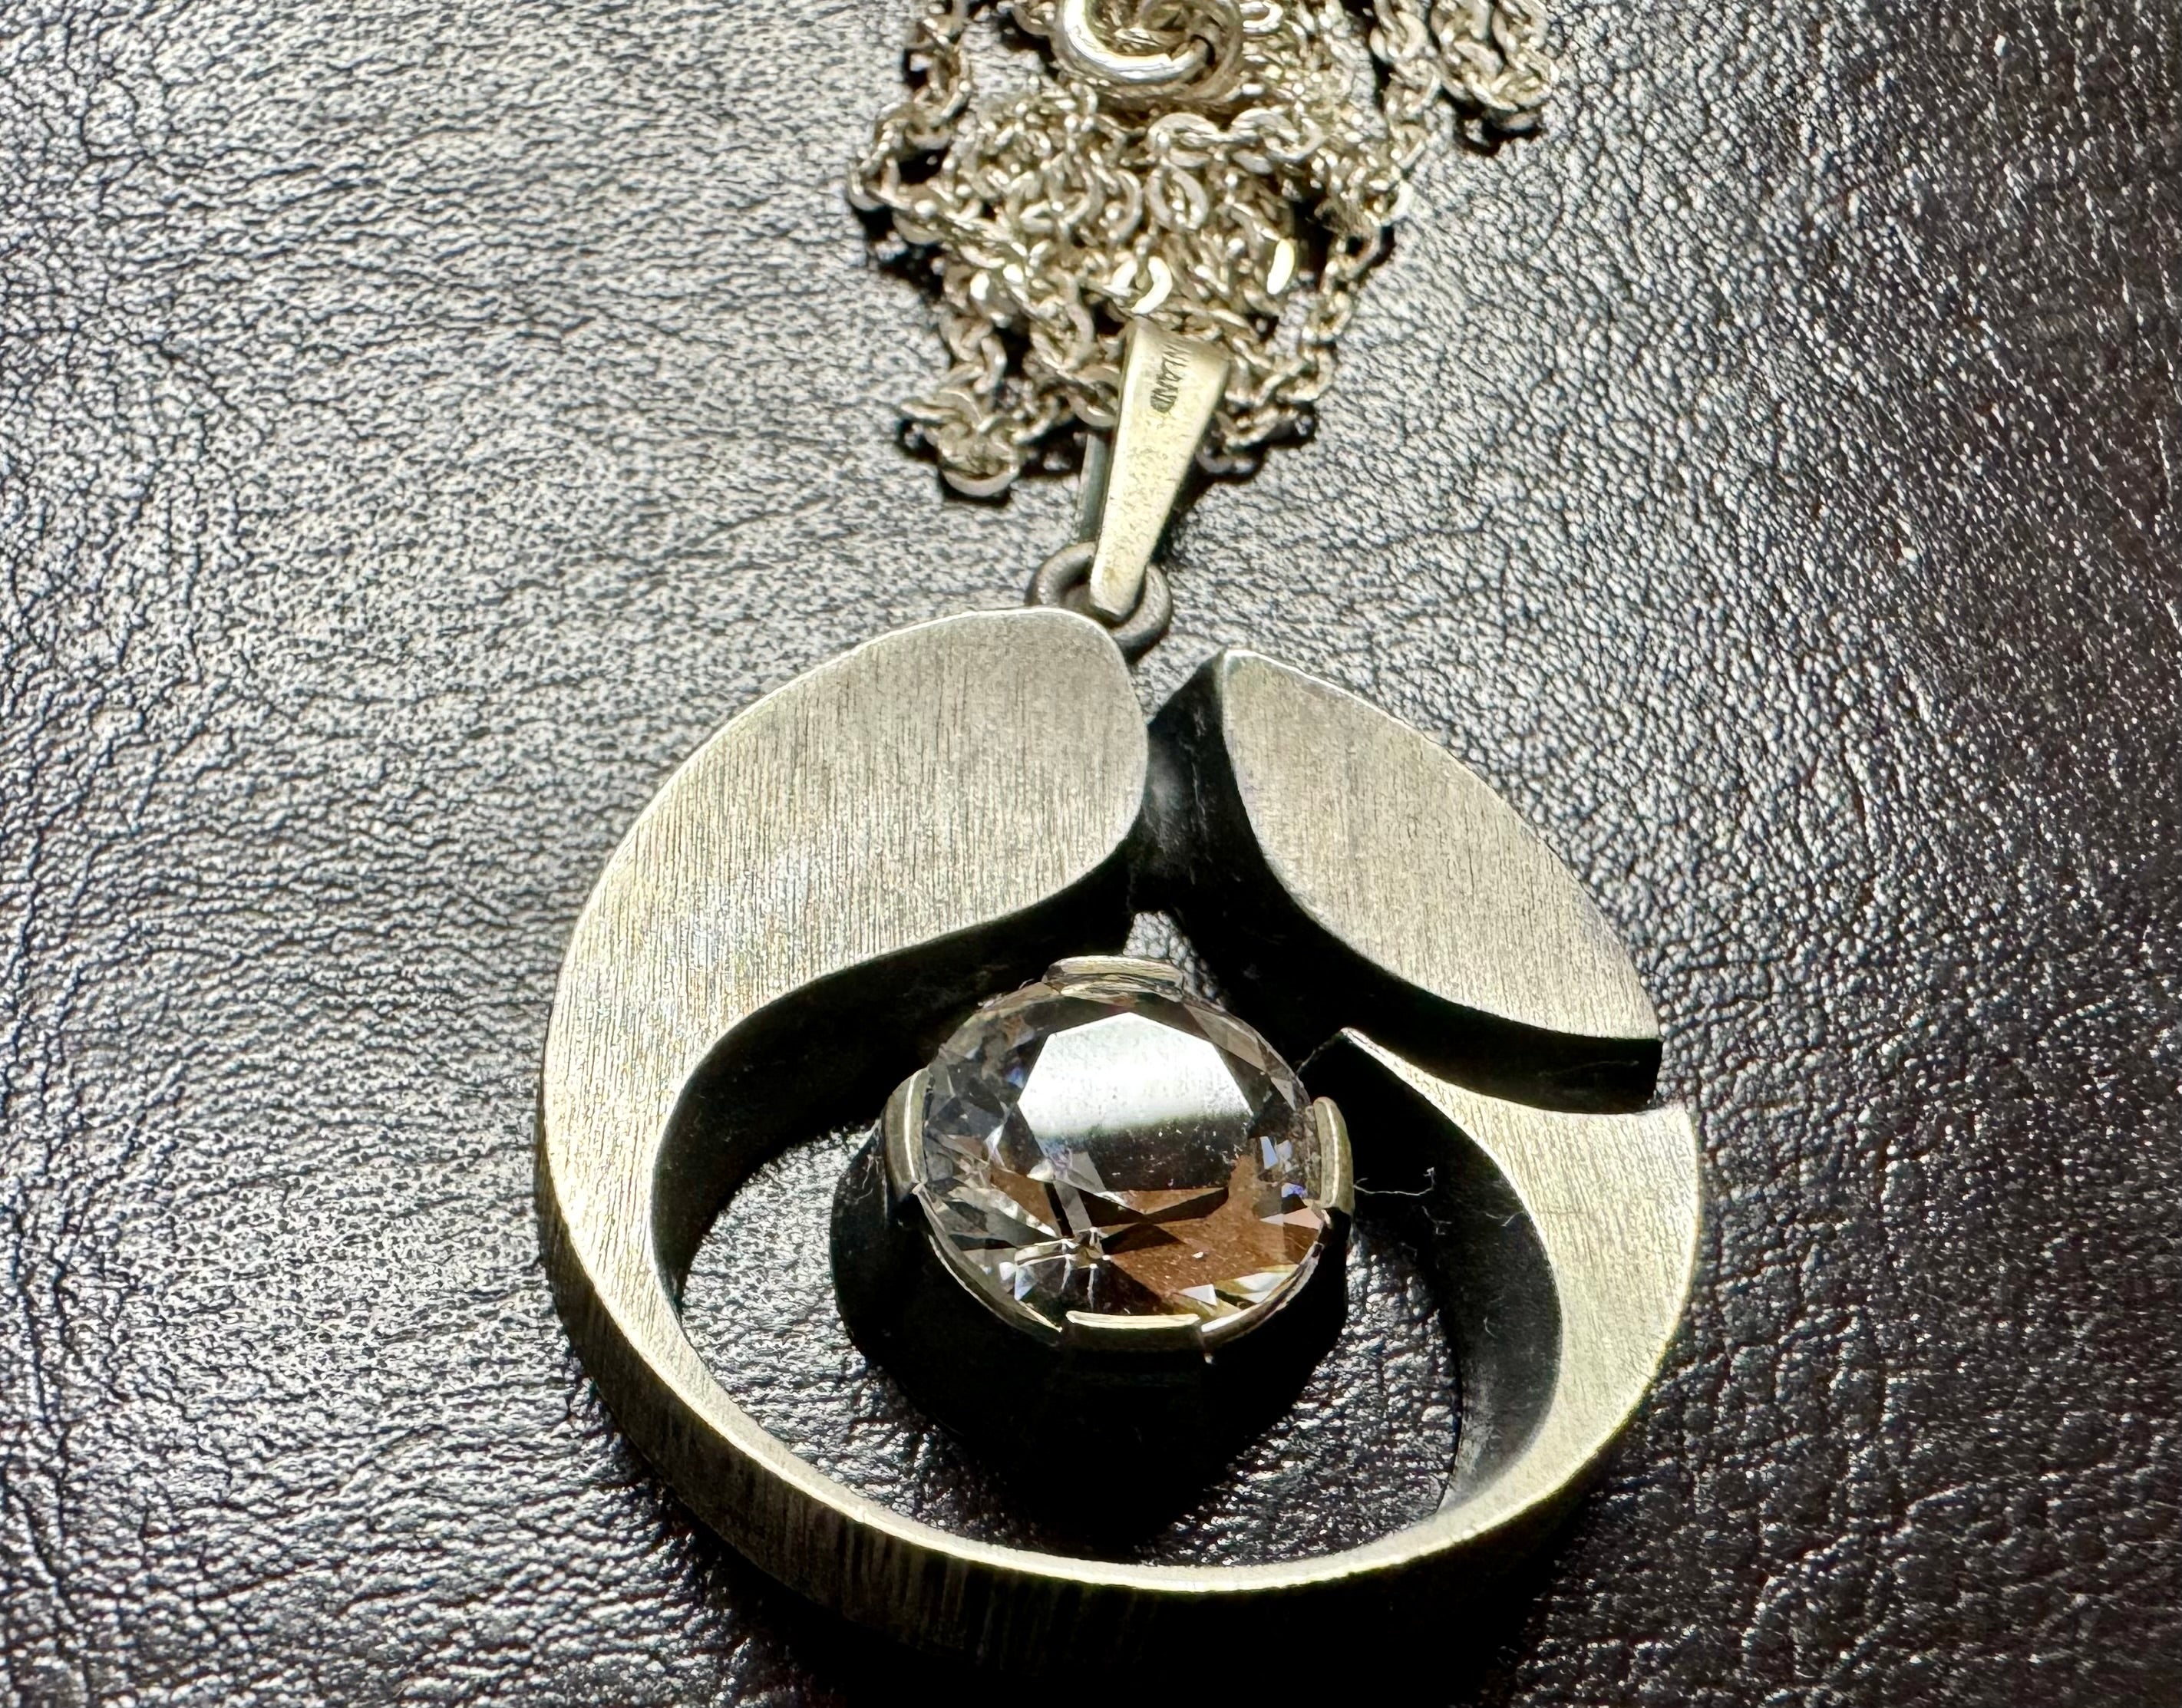 Sterling Silver Necklace by Karl Laine, Finland, 1976
925H Silver
Exquisite necklace with clear stone.
Stone Rock crystal.
3cm in diameter with pendant
chain 53 cm long